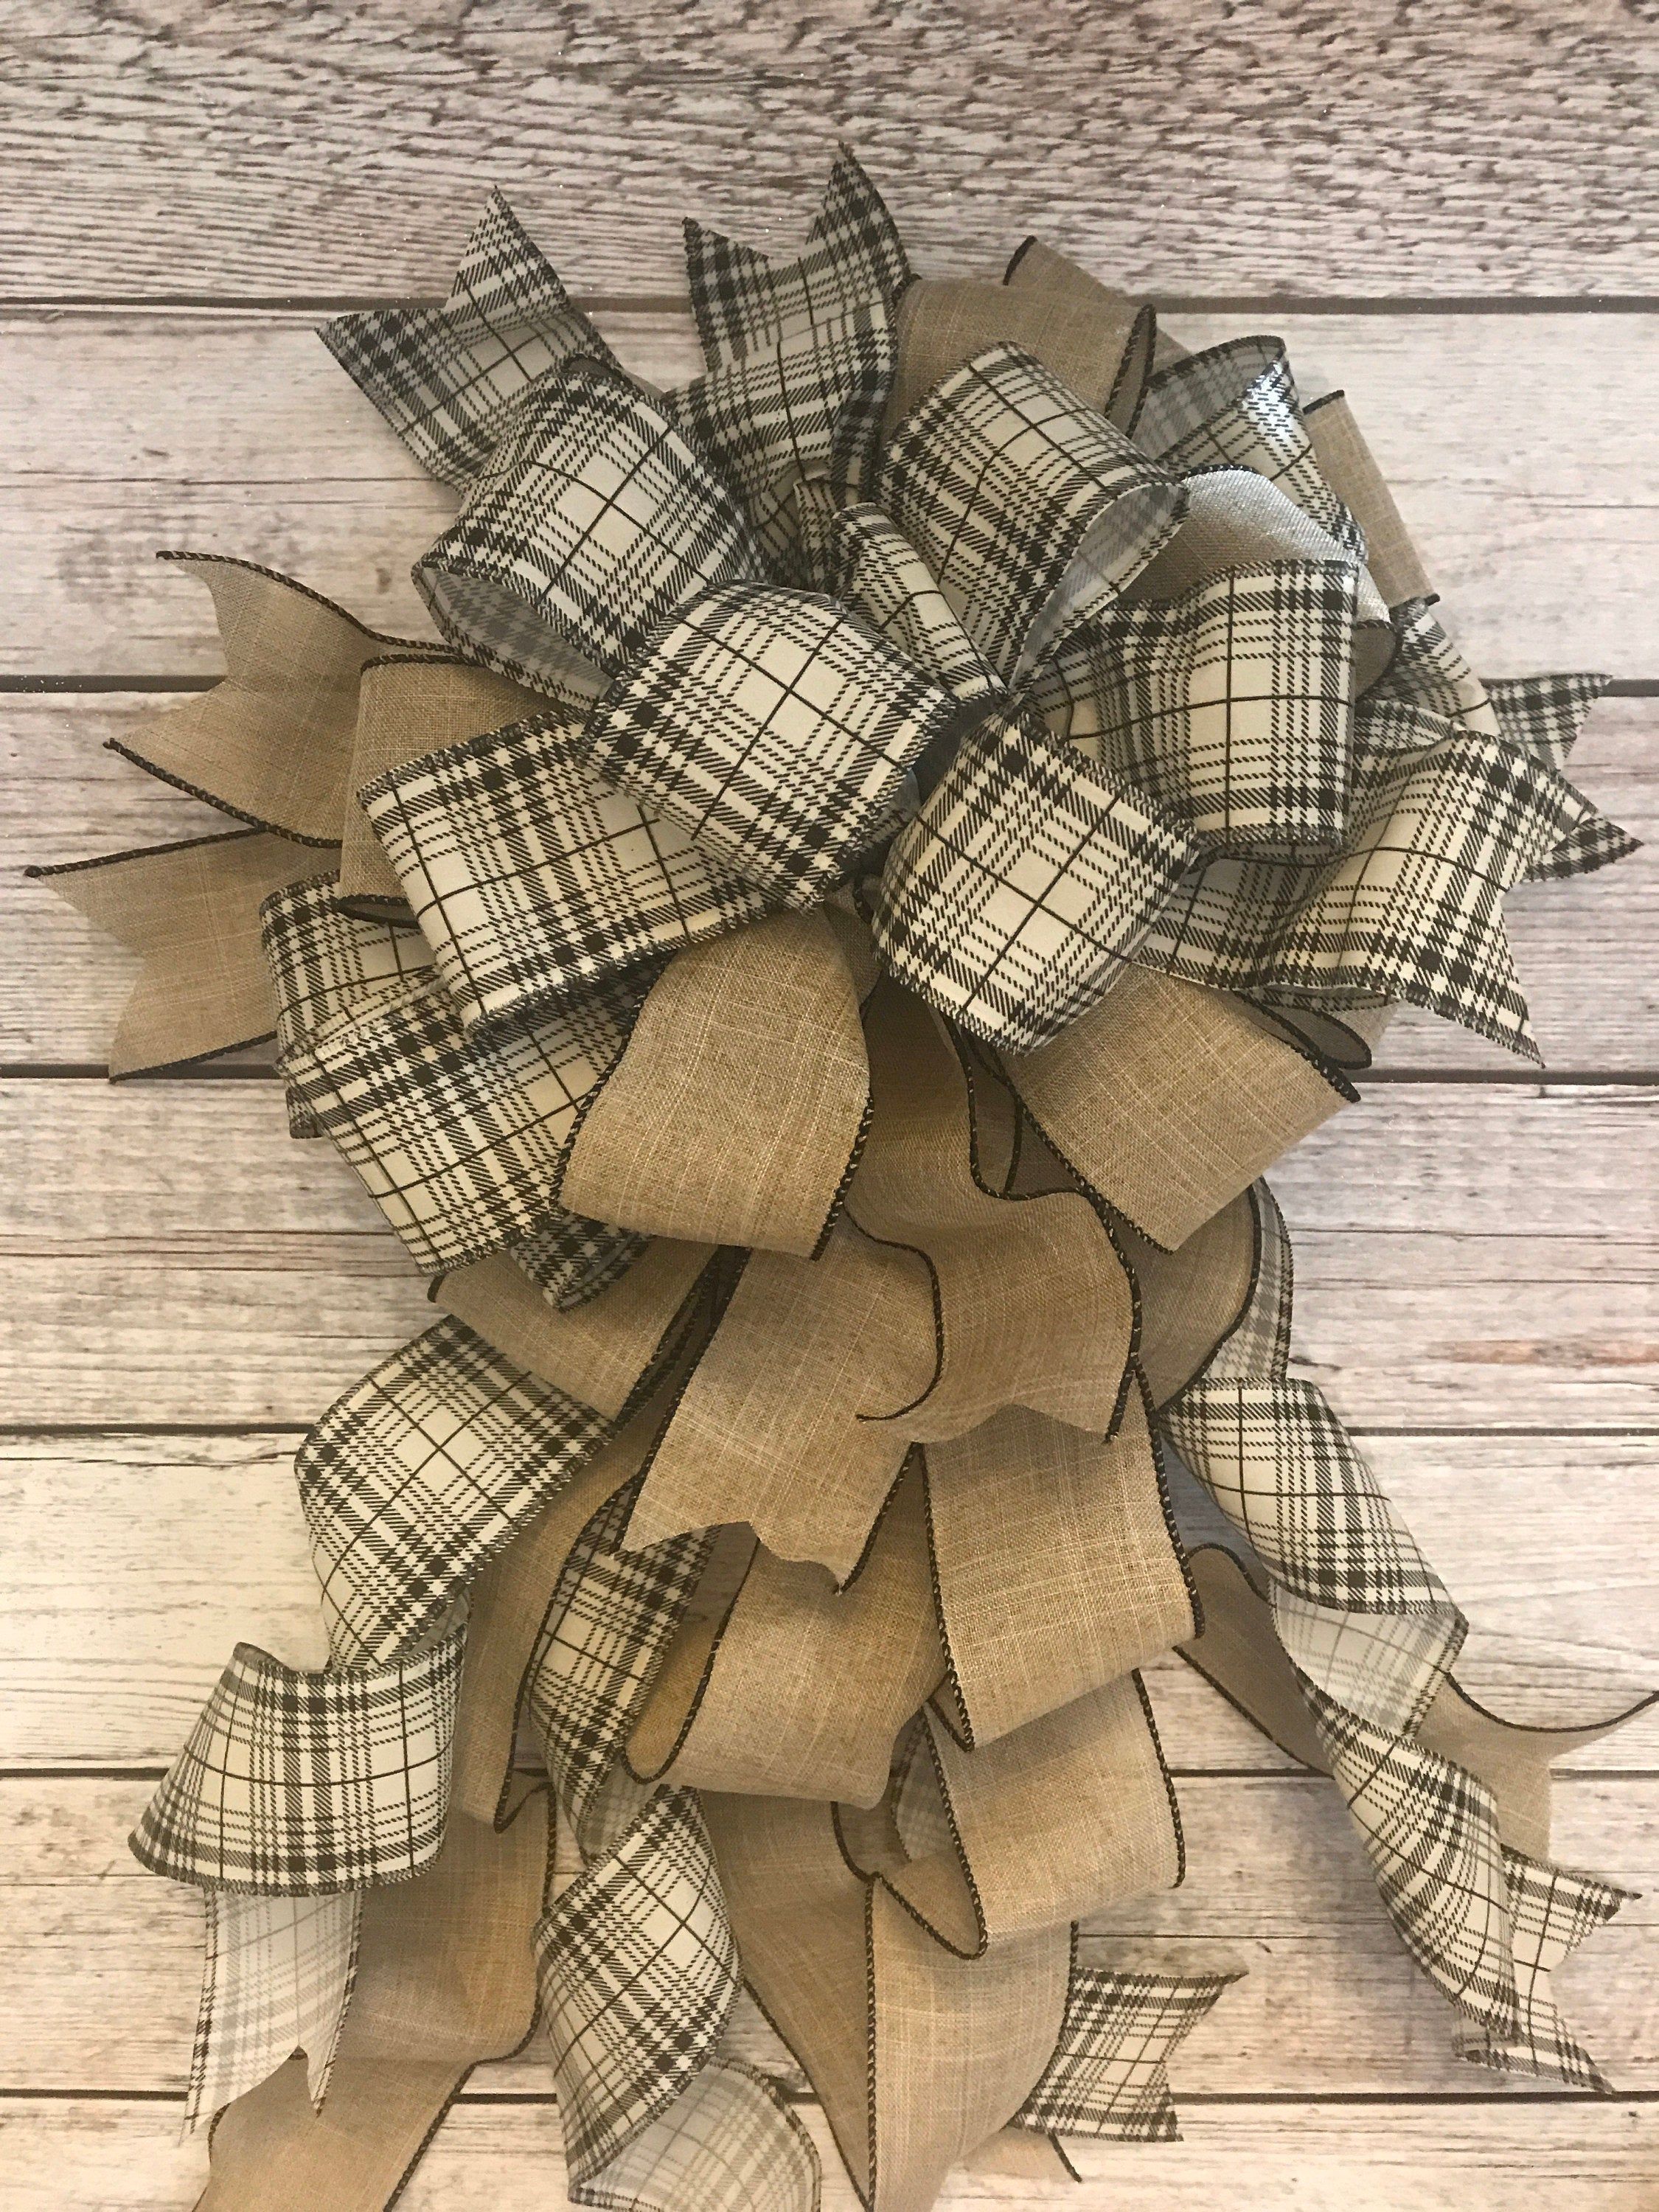 New Reduced PriceLarge Black and White Plaid Burlap Rustic | Etsy - New Reduced PriceLarge Black and White Plaid Burlap Rustic | Etsy -   18 farmhouse christmas tree topper wreaths & garlands ideas